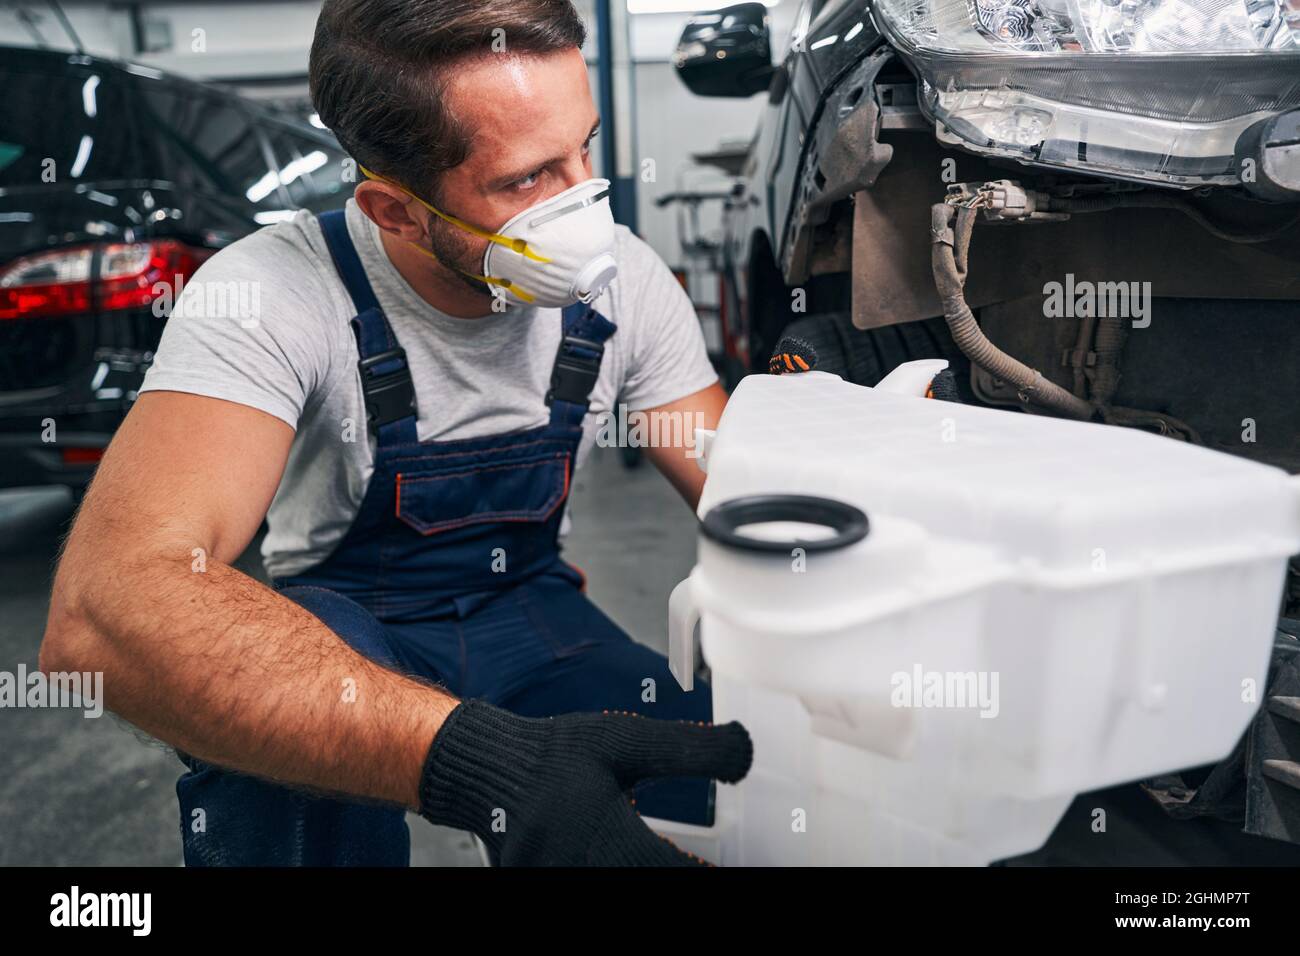 Washer bottle in hand of car technician Stock Photo